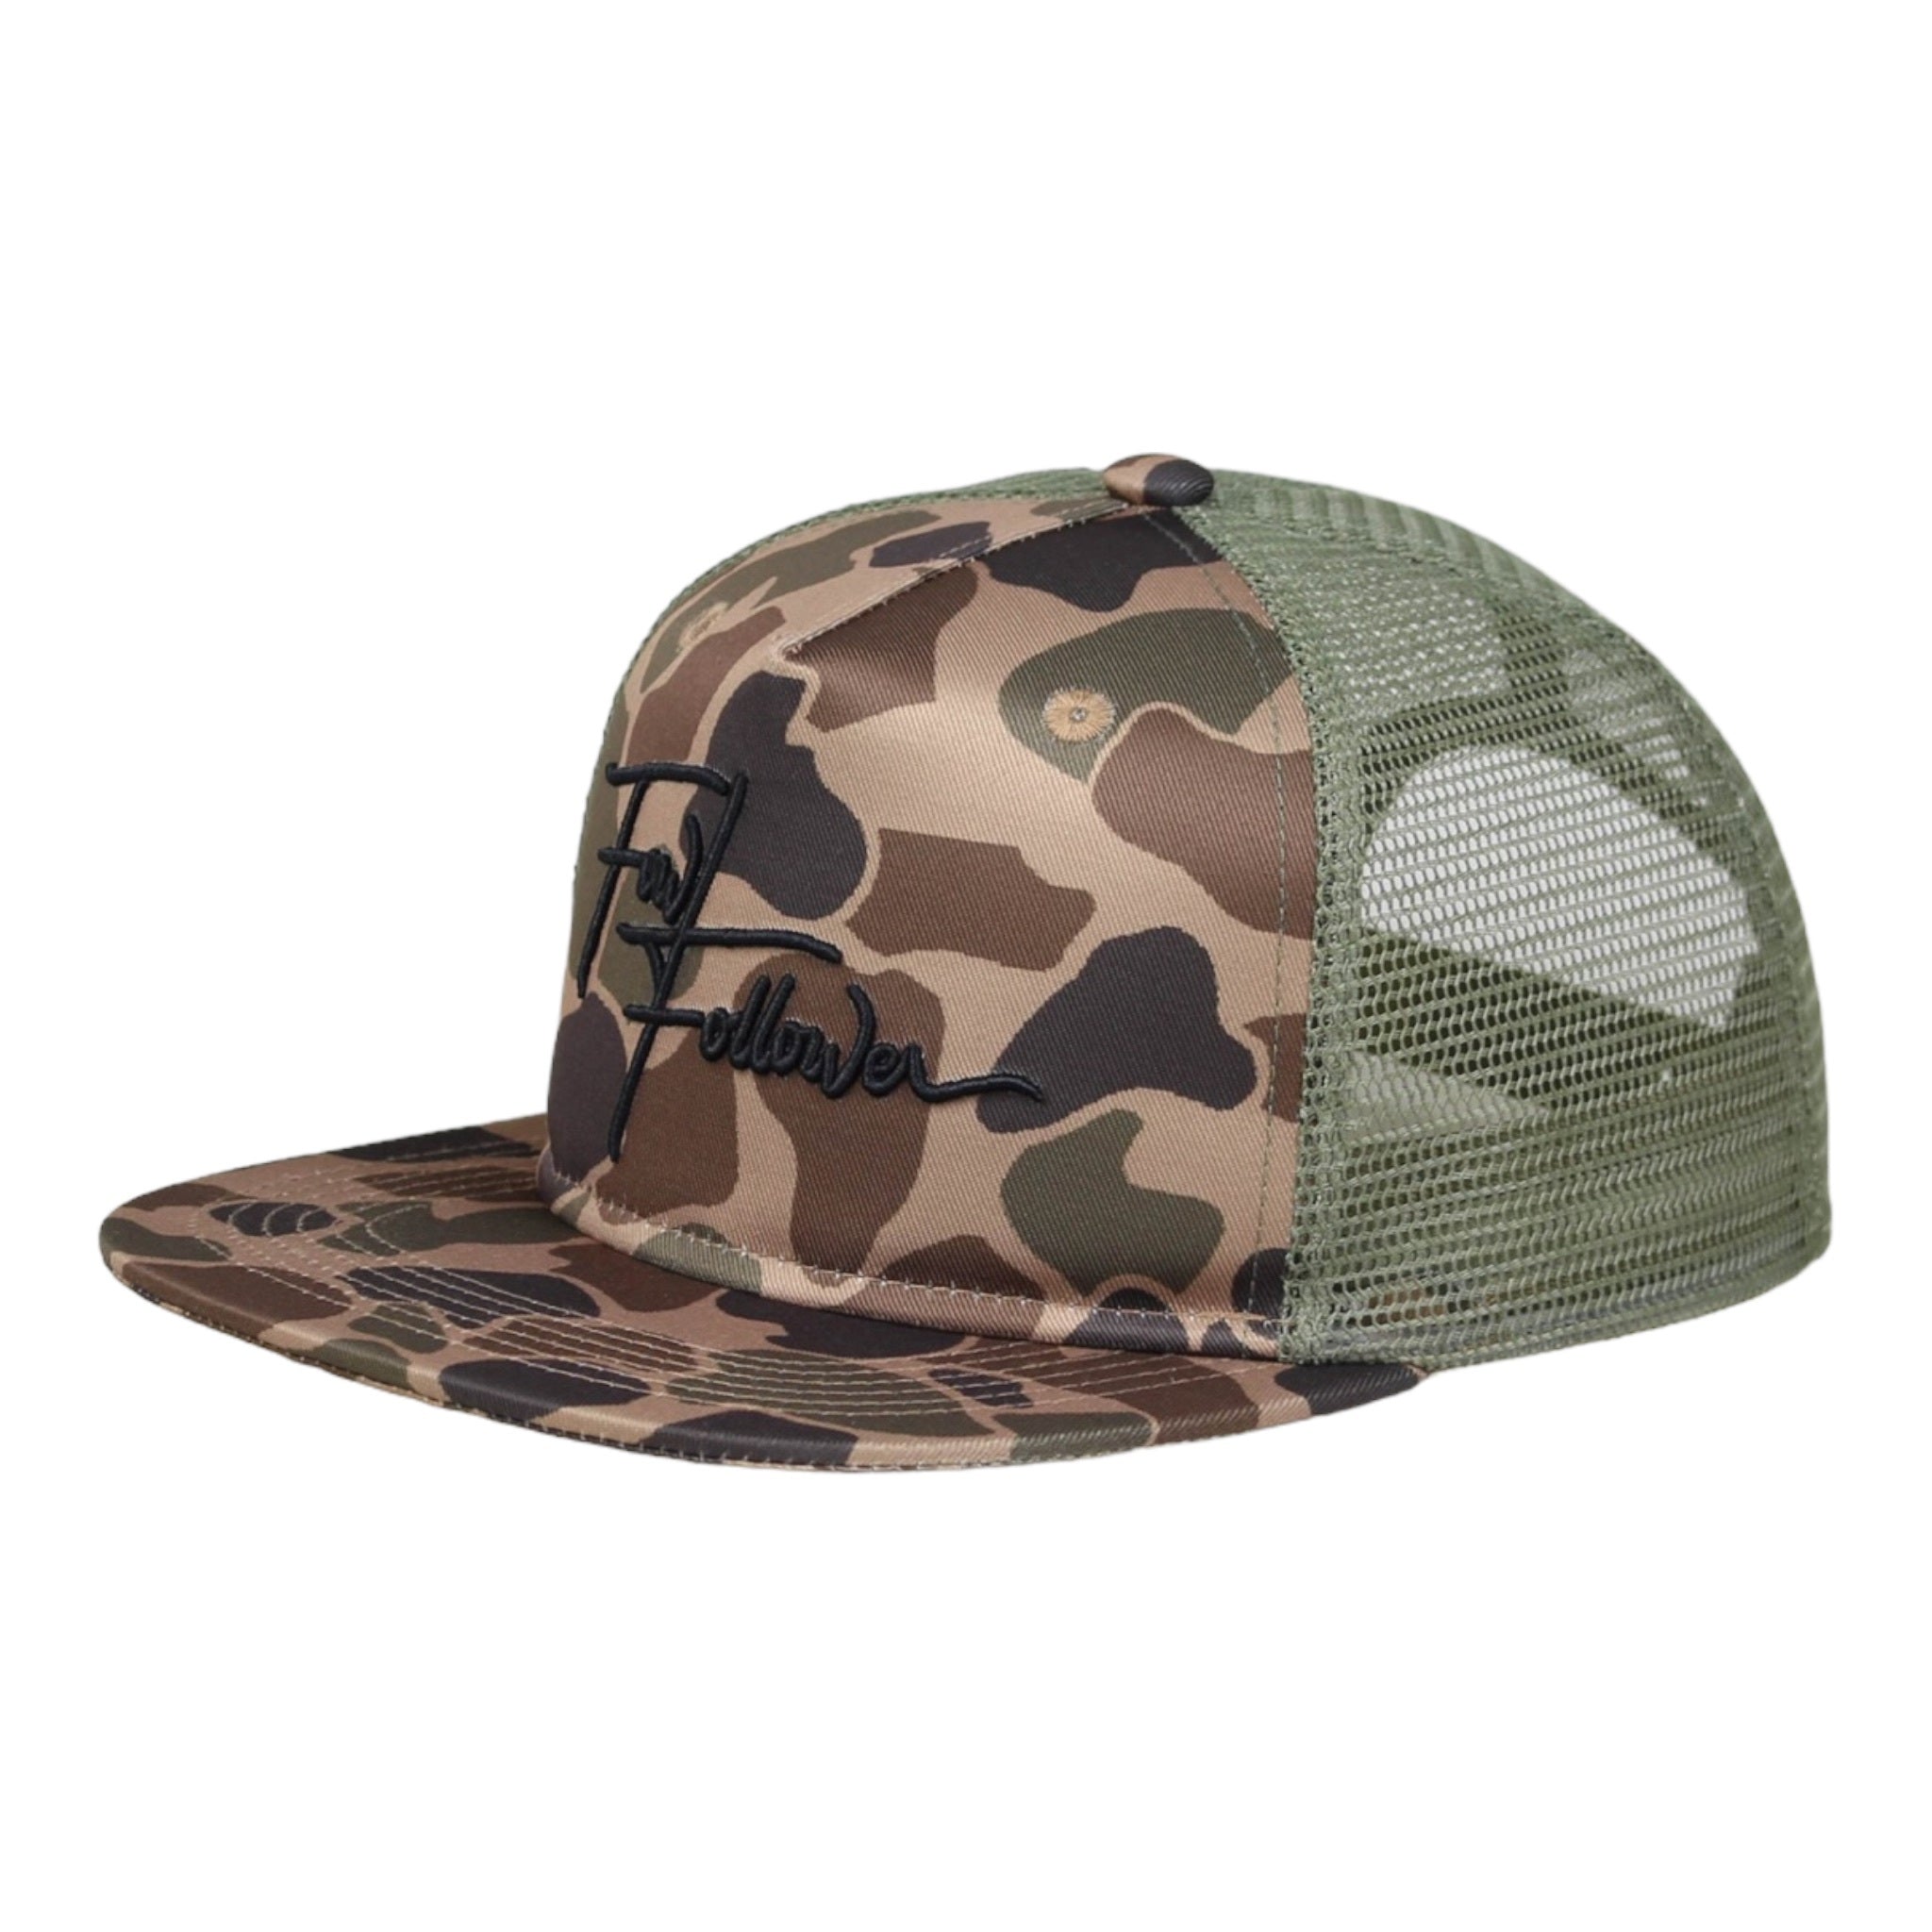 A Fowl Follower Favorite Camo Hat with a black embroidered logo.